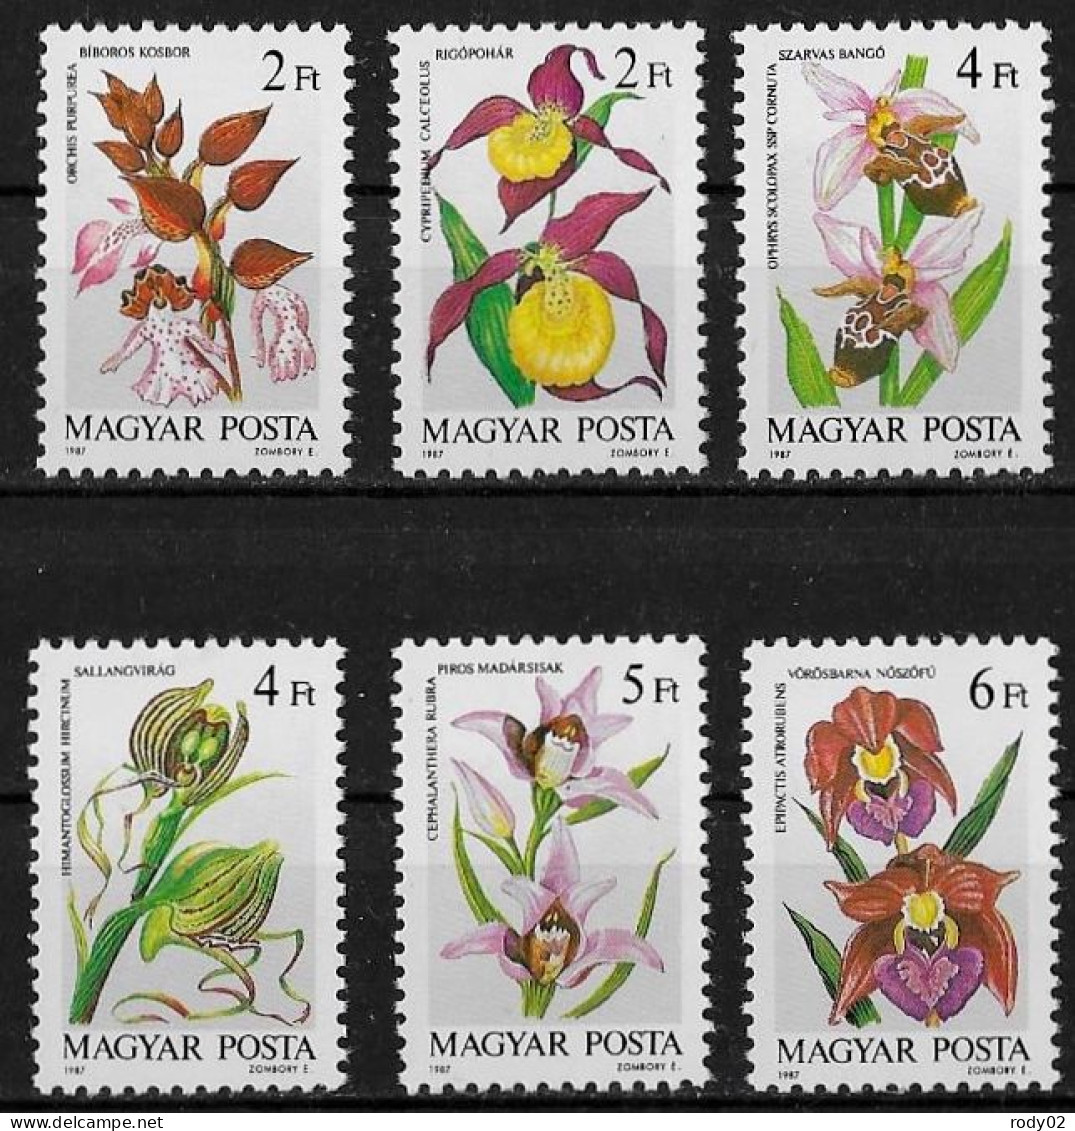 HONGRIE - FLEURS - ORCHIDEES - N° 3129 A 3134 - NEUF** MNH - Orchidee